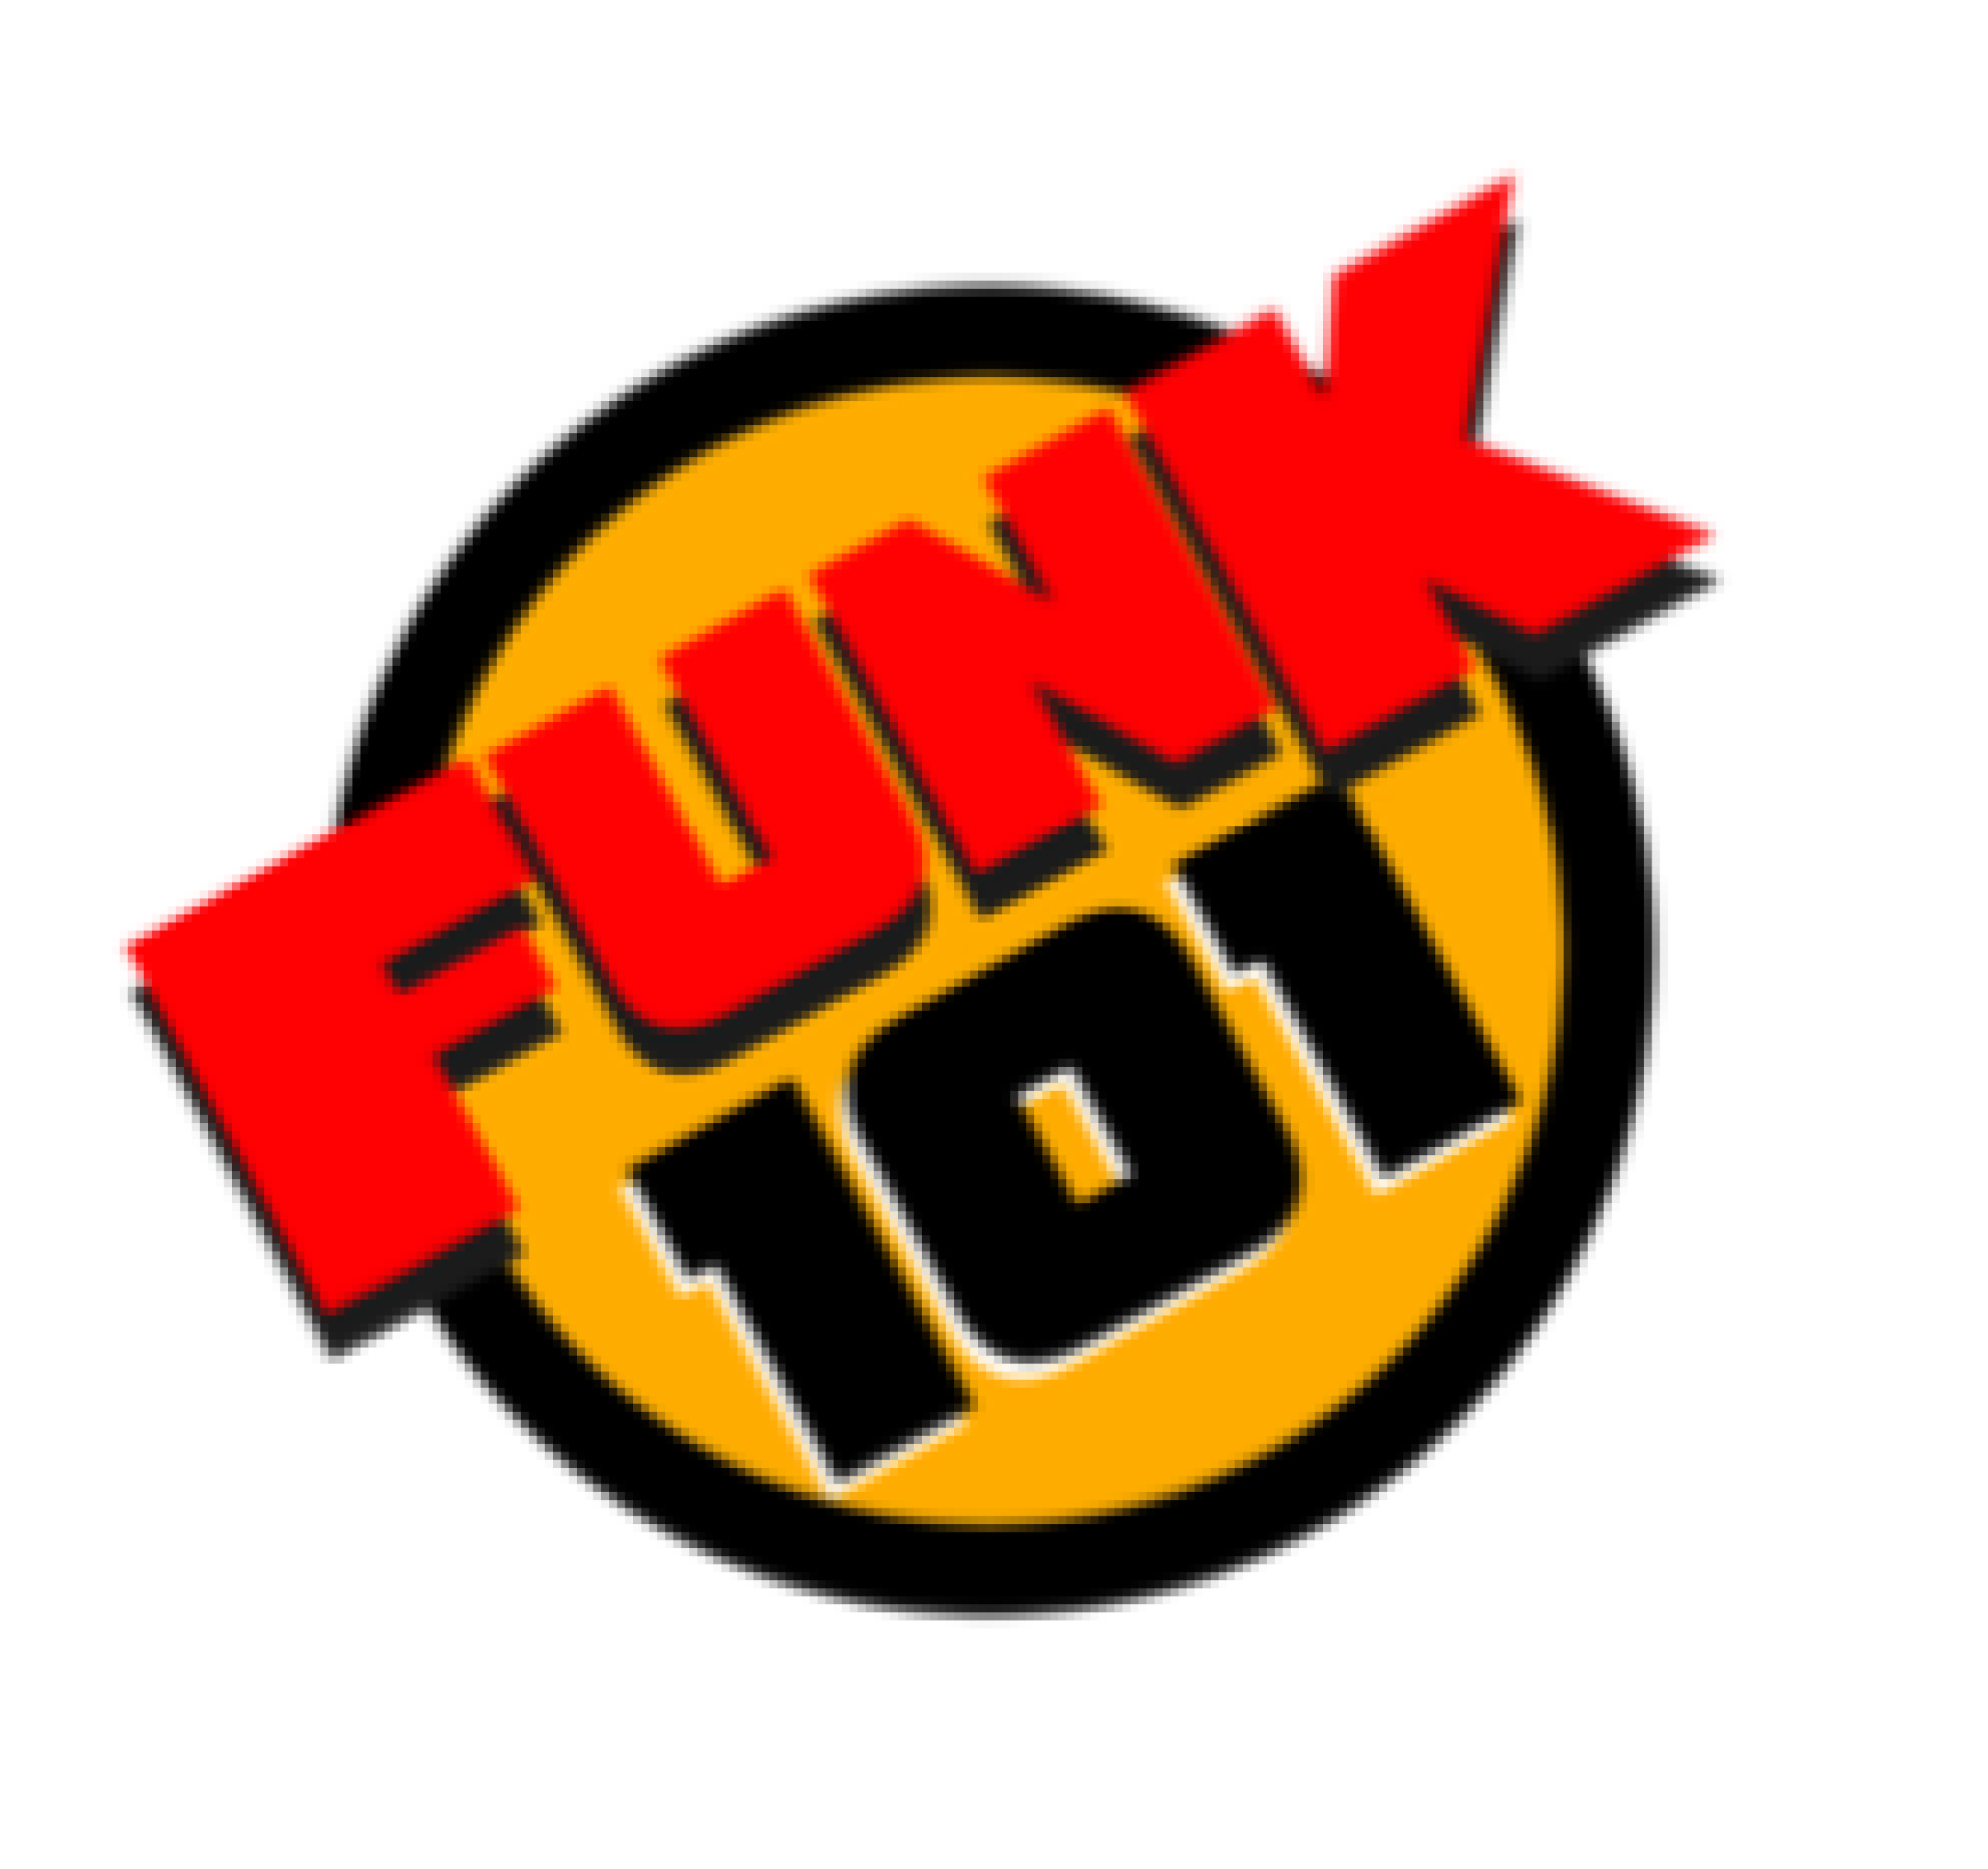 Art for Happy Holidays From Funk 101 by www.funk101radio.com